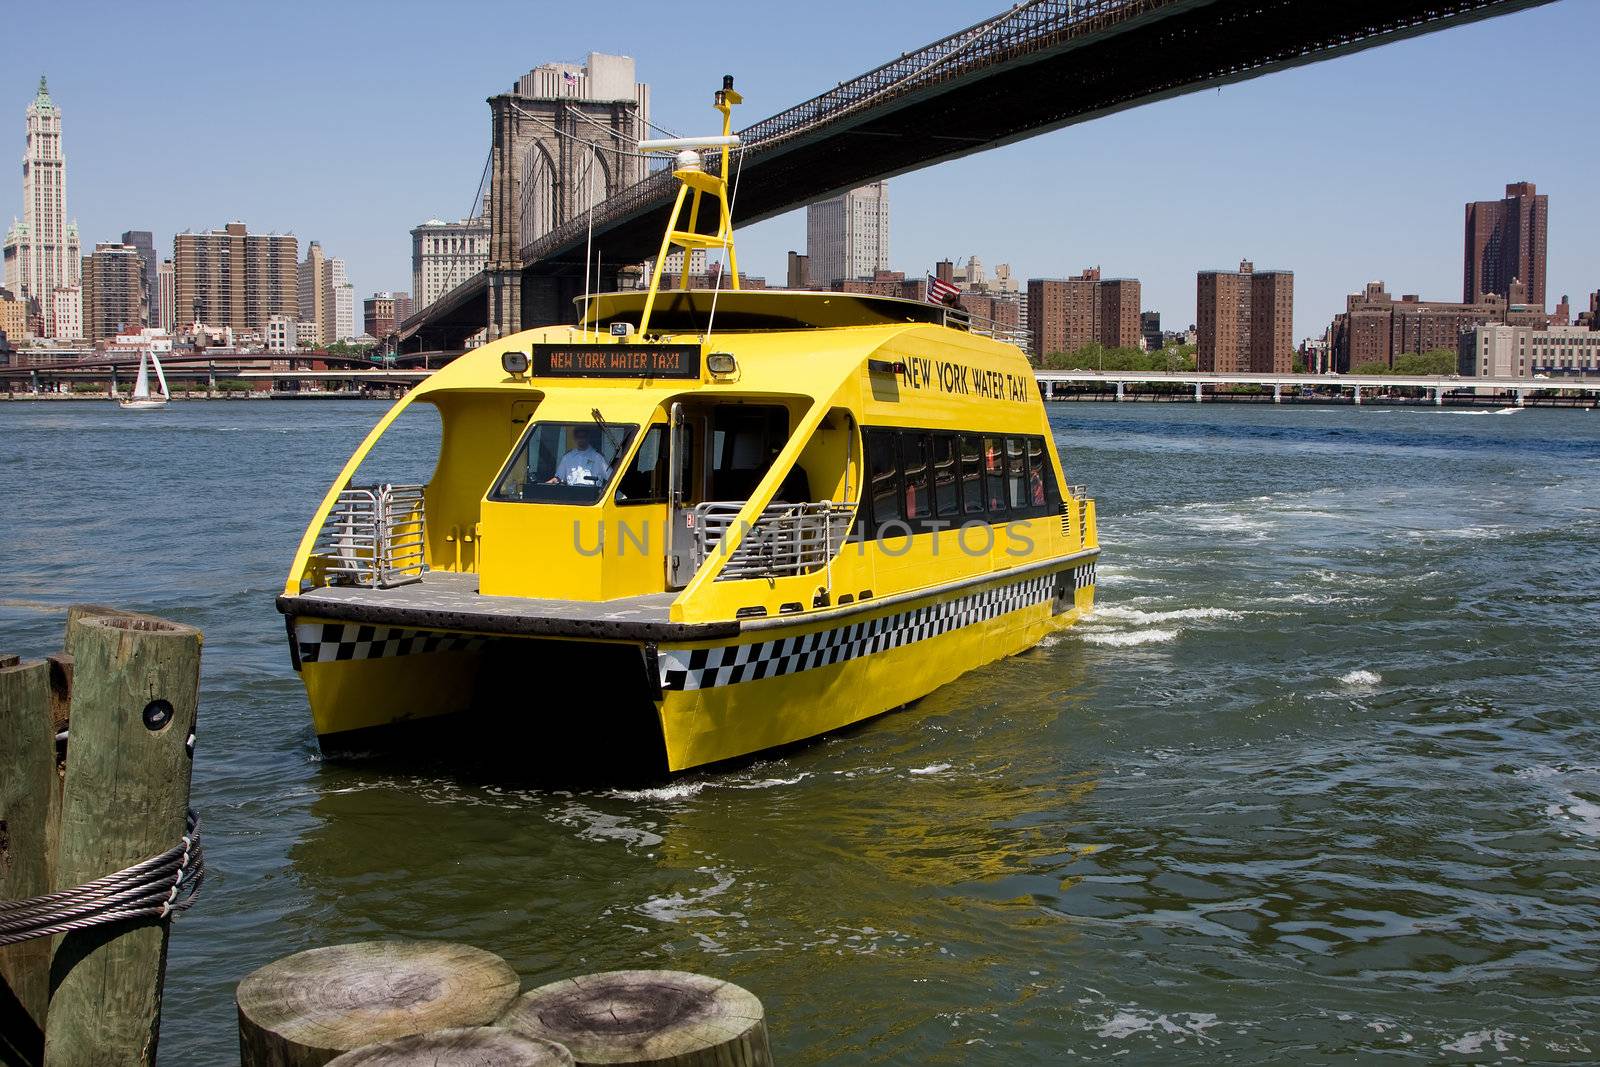 New York City's water taxi arriving at Fulton Ferry landing in Brooklyn. Here seen with the Brooklyn Bridge in the background on a bright sunny day with a depp blue sky.